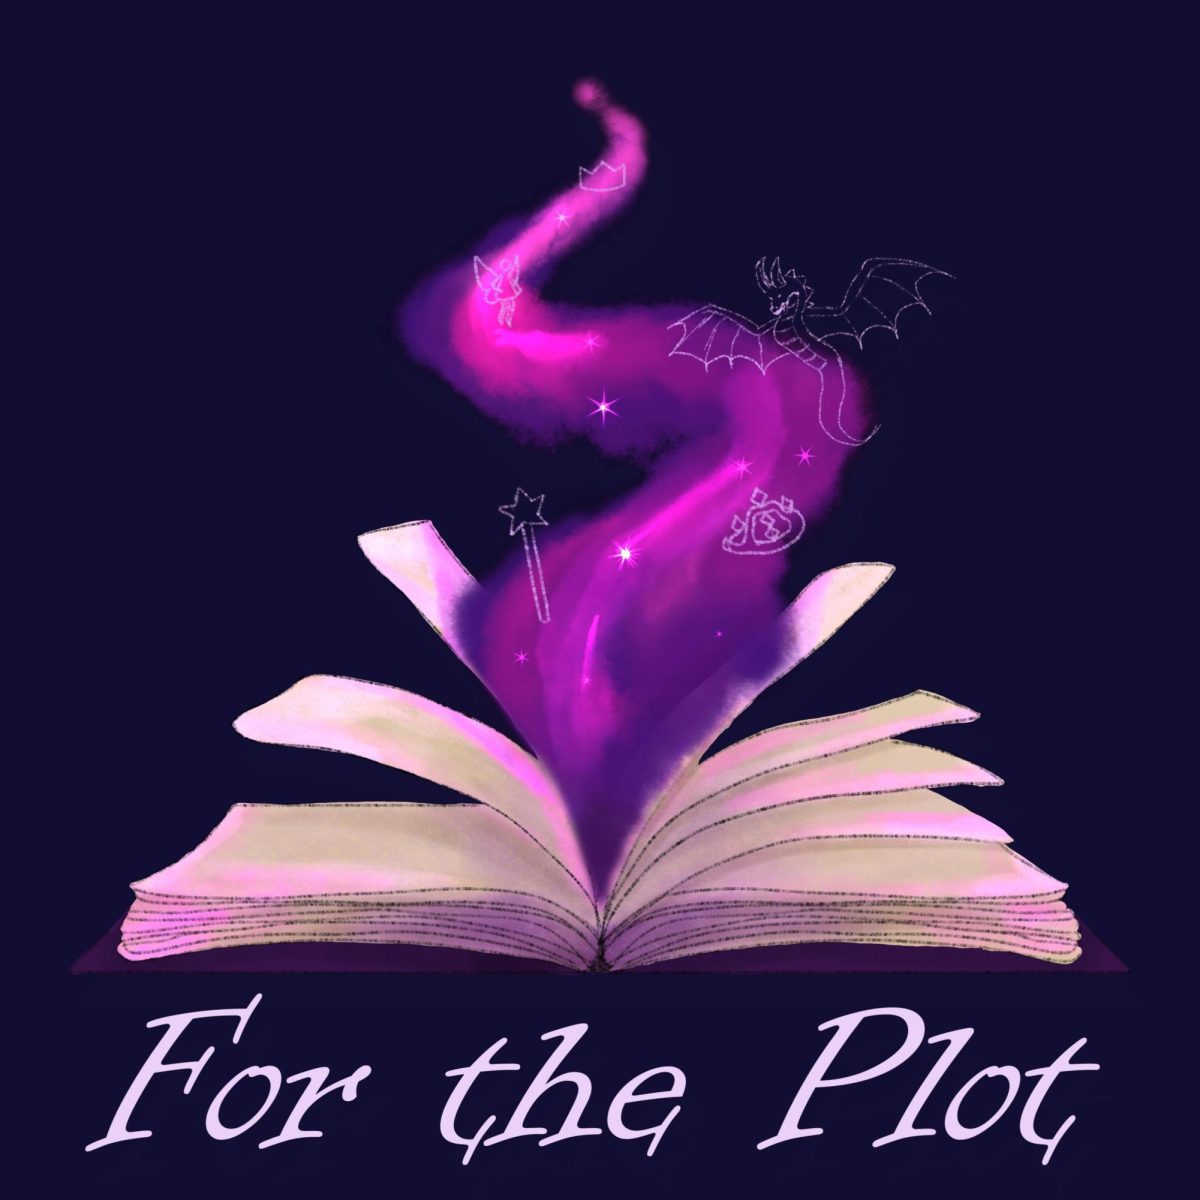 For+the+Plot+%7C+%E2%80%98A+Touch+of+Darkness%E2%80%99+review